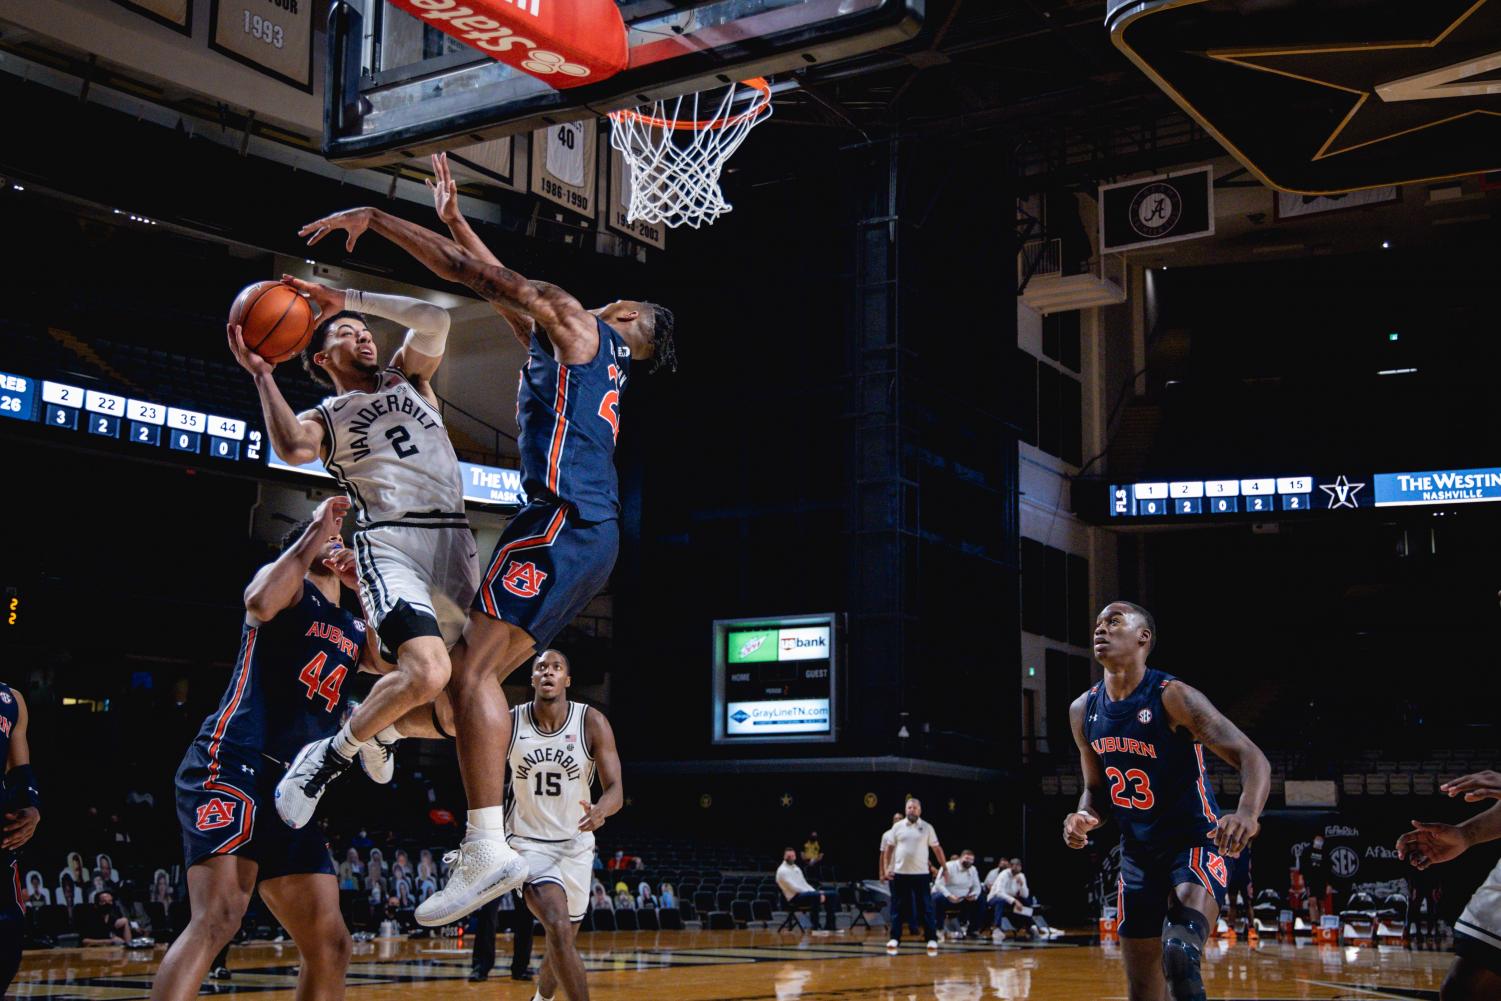 Scotty Pippen Jr. fights for a contested layup in Vanderbilts loss to Auburn. in Feb., 2021.